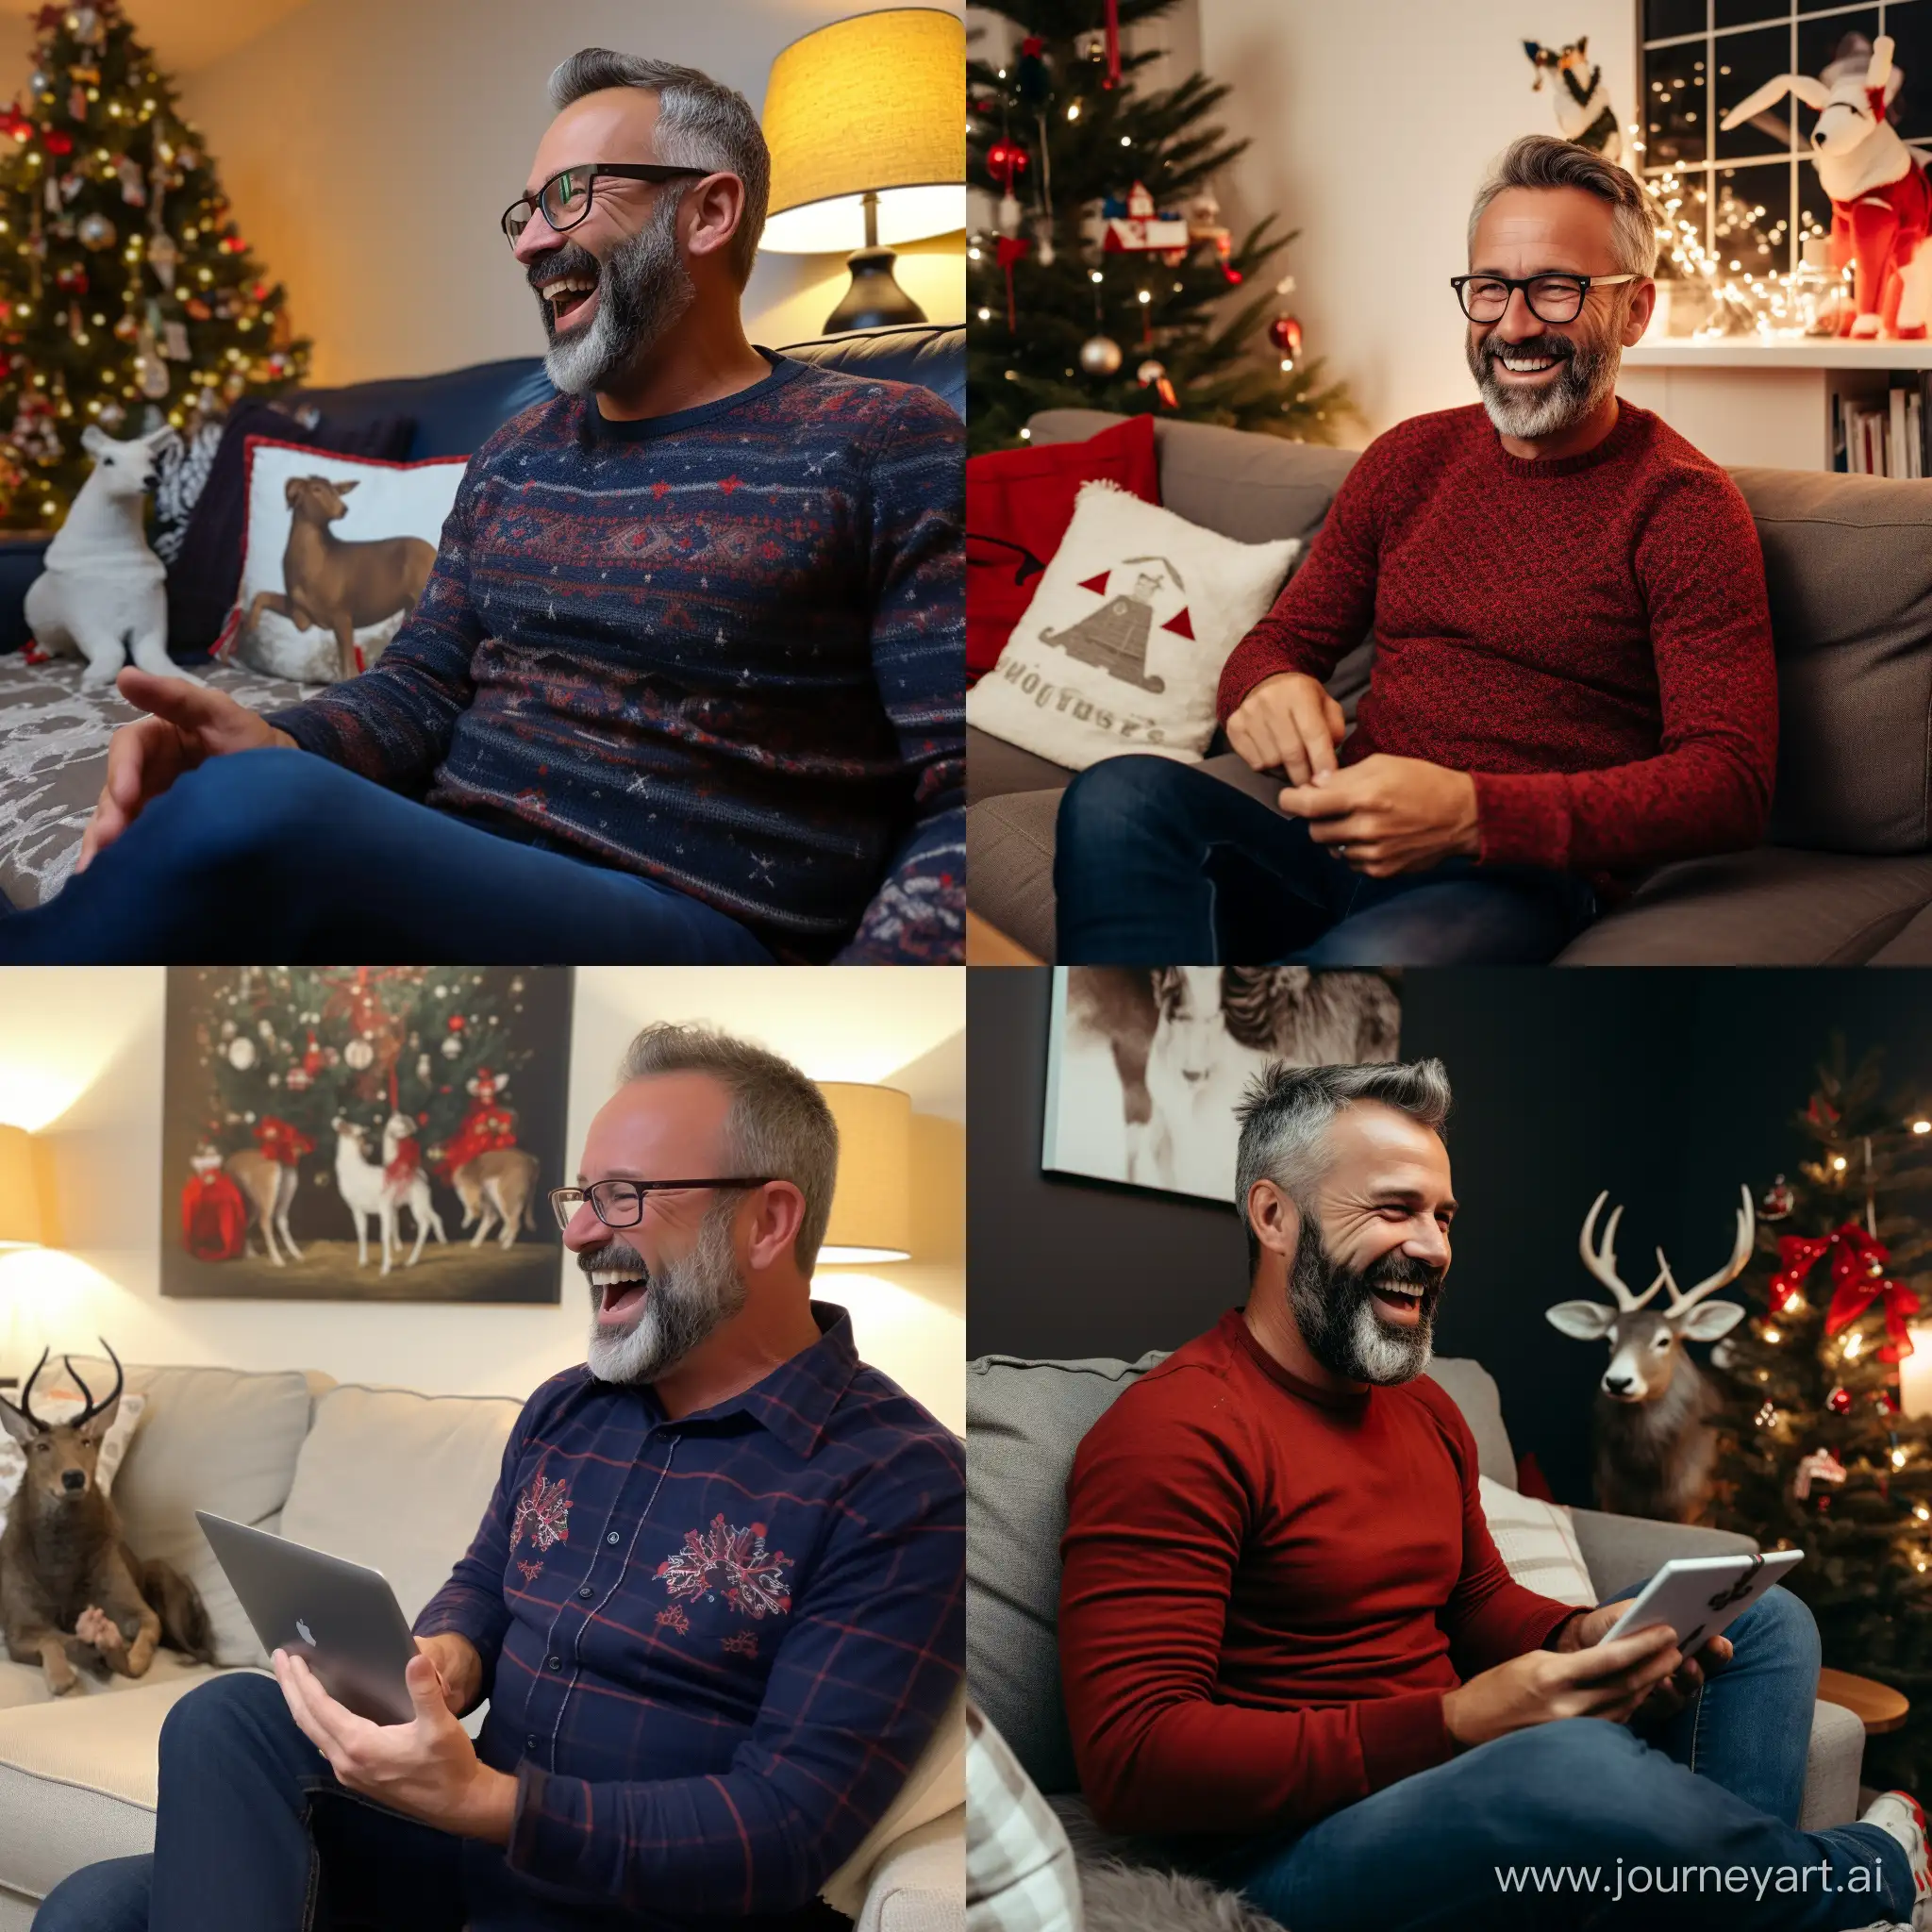 A middle-aged man in jeans and a sweater with reindeer is talking via video link with his wife.  The photo shows a middle-aged man sitting on a sofa in the living room. He is wearing jeans and a sweater with deer on it. The sweater is dark blue with red deer. A man of medium height and build. He has short dark hair and a beard. He smiles and looks relaxed.  He has a phone in his hand, through which he speaks via video link with his wife. The woman on the phone screen is smiling and also looks happy.  There is a mug of fragrant coffee on the table in front of the man. Steam is coming out of the mug because the coffee is hotter. The inscription on the mug is "Light business trip".  The living room is flooded with warm light coming from a floor lamp and a garland on the Christmas tree. There are paintings of winter landscapes on the walls. There is a soft carpet on the floor, on which pillows are scattered.  Outside the window there is a view of the snow-covered city. The red lights of the cars are slightly blurred, creating a feeling of comfort and tranquility. A man enjoys the warmth and comfort of his apartment, despite the cold winter outside the window